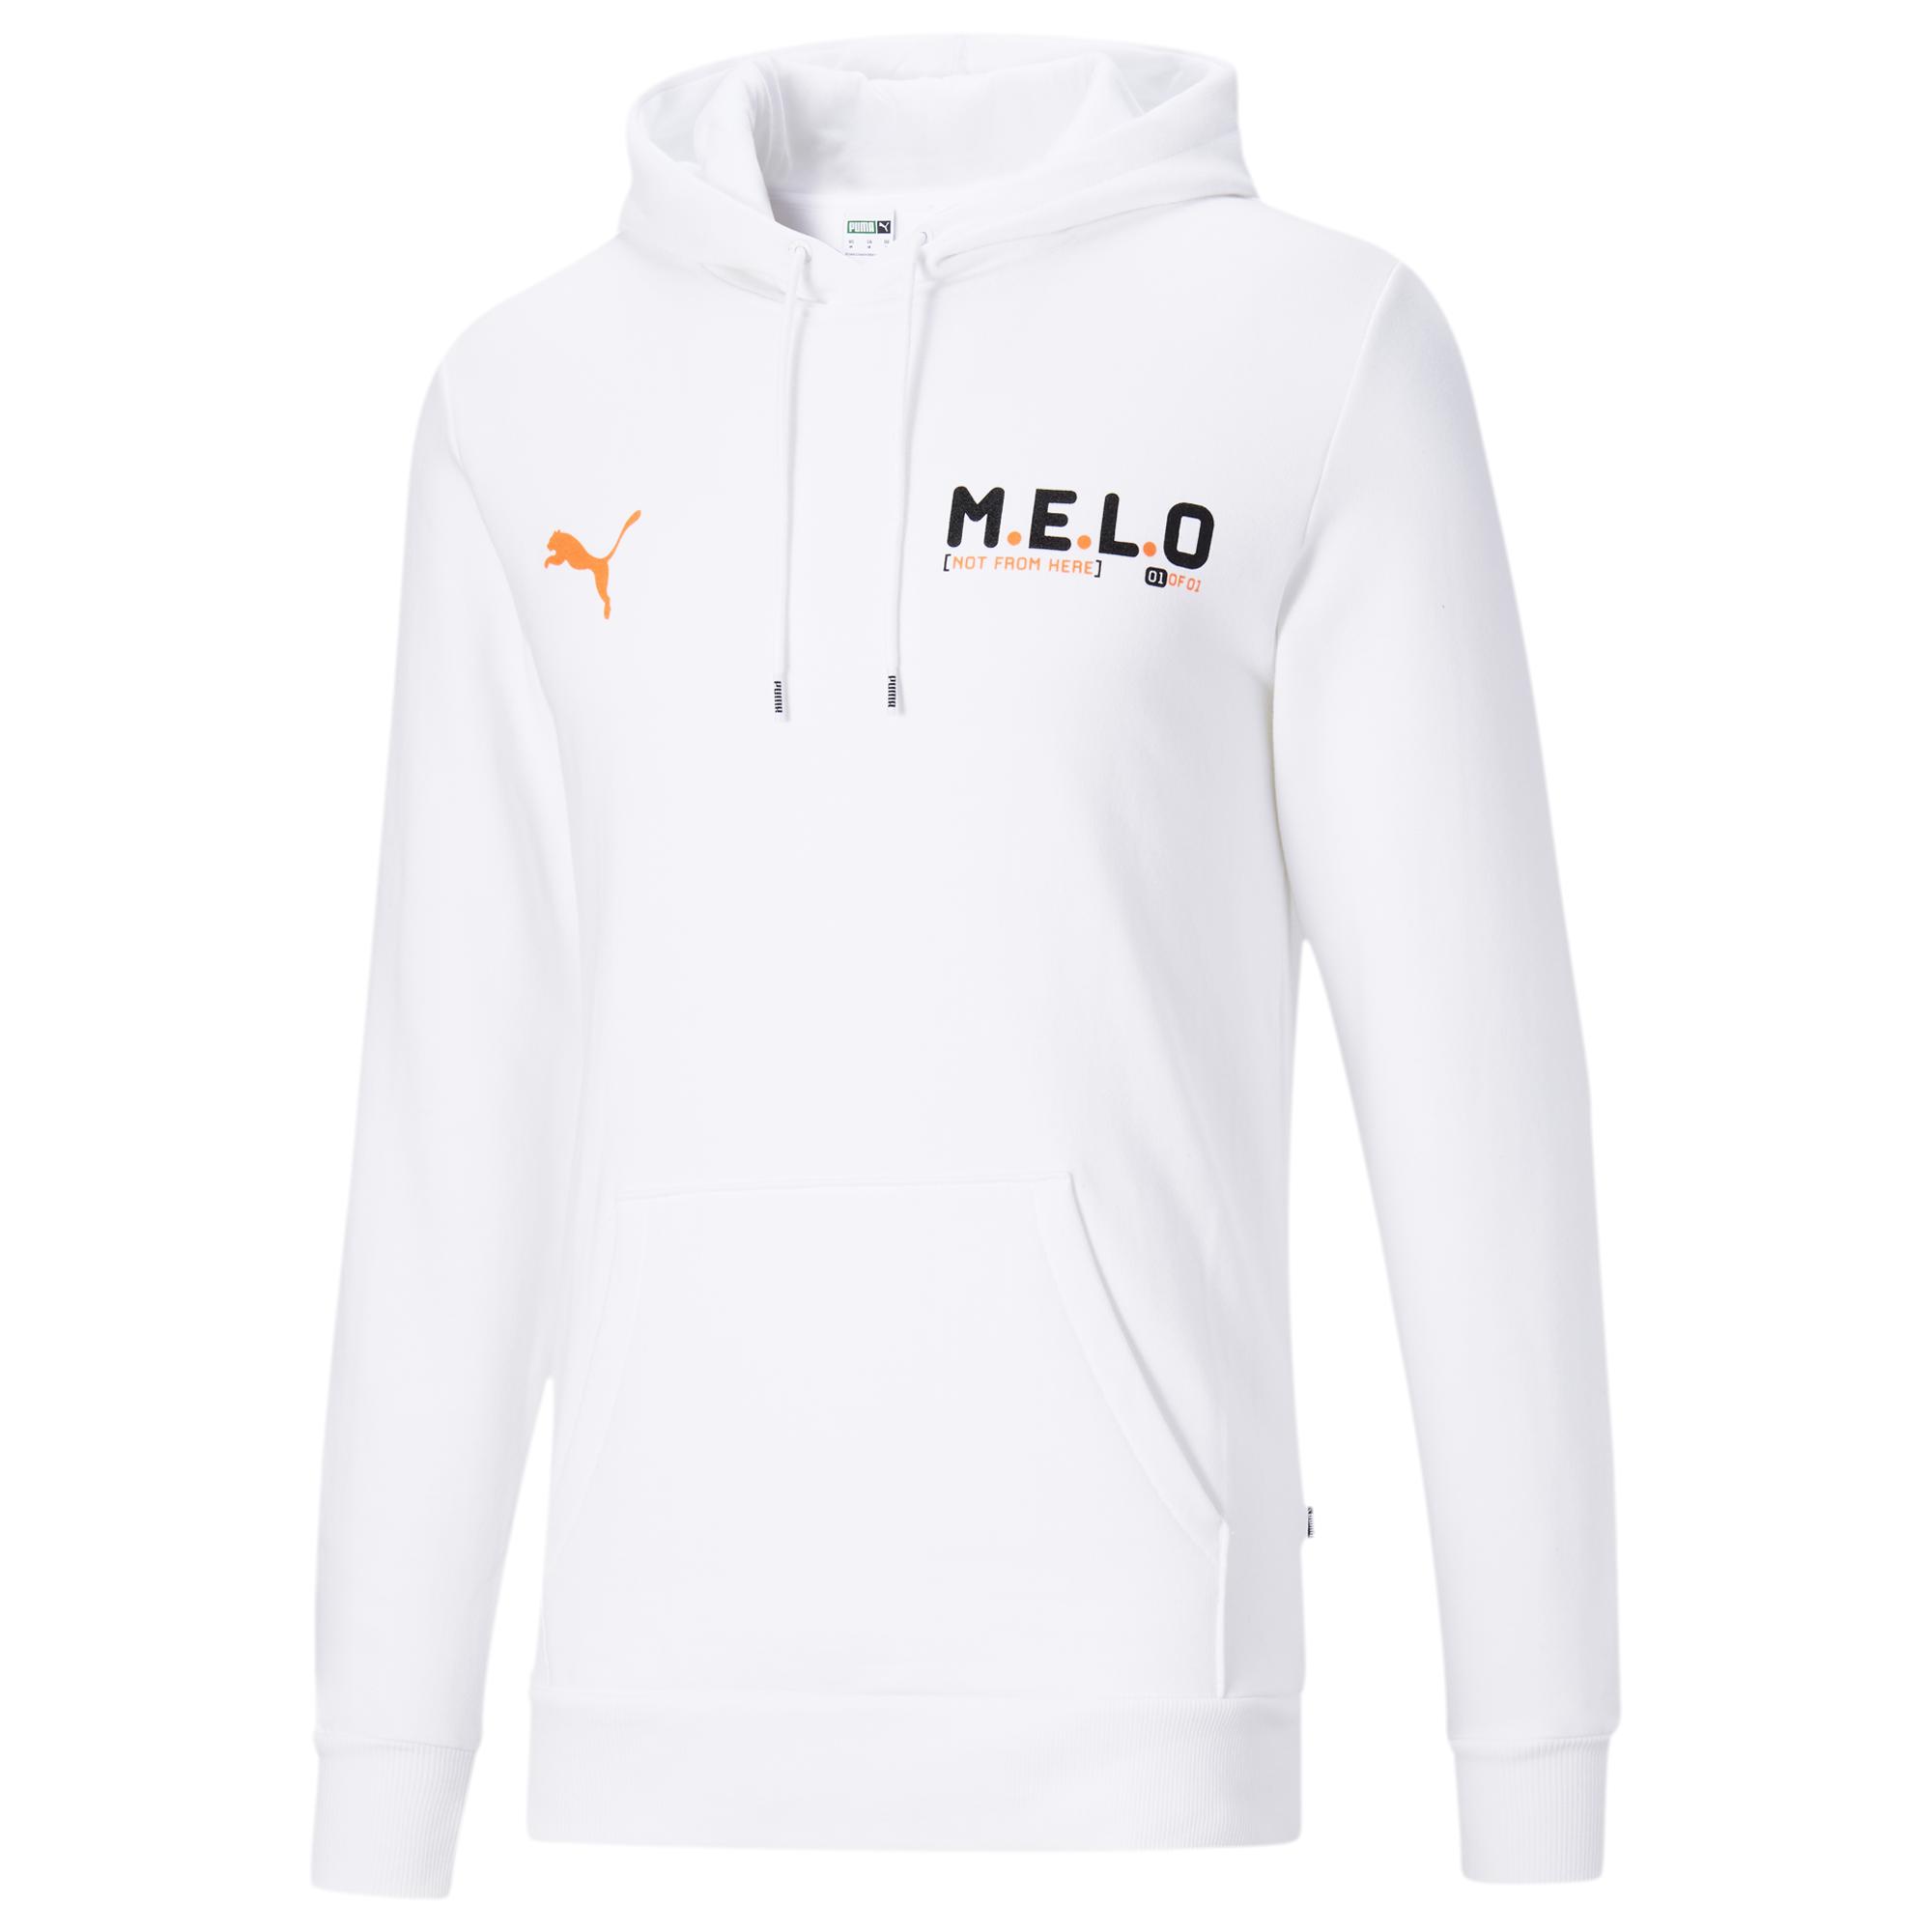 PUMA Cotton Melo Logo Hoodie in White for Men - Save 23% - Lyst